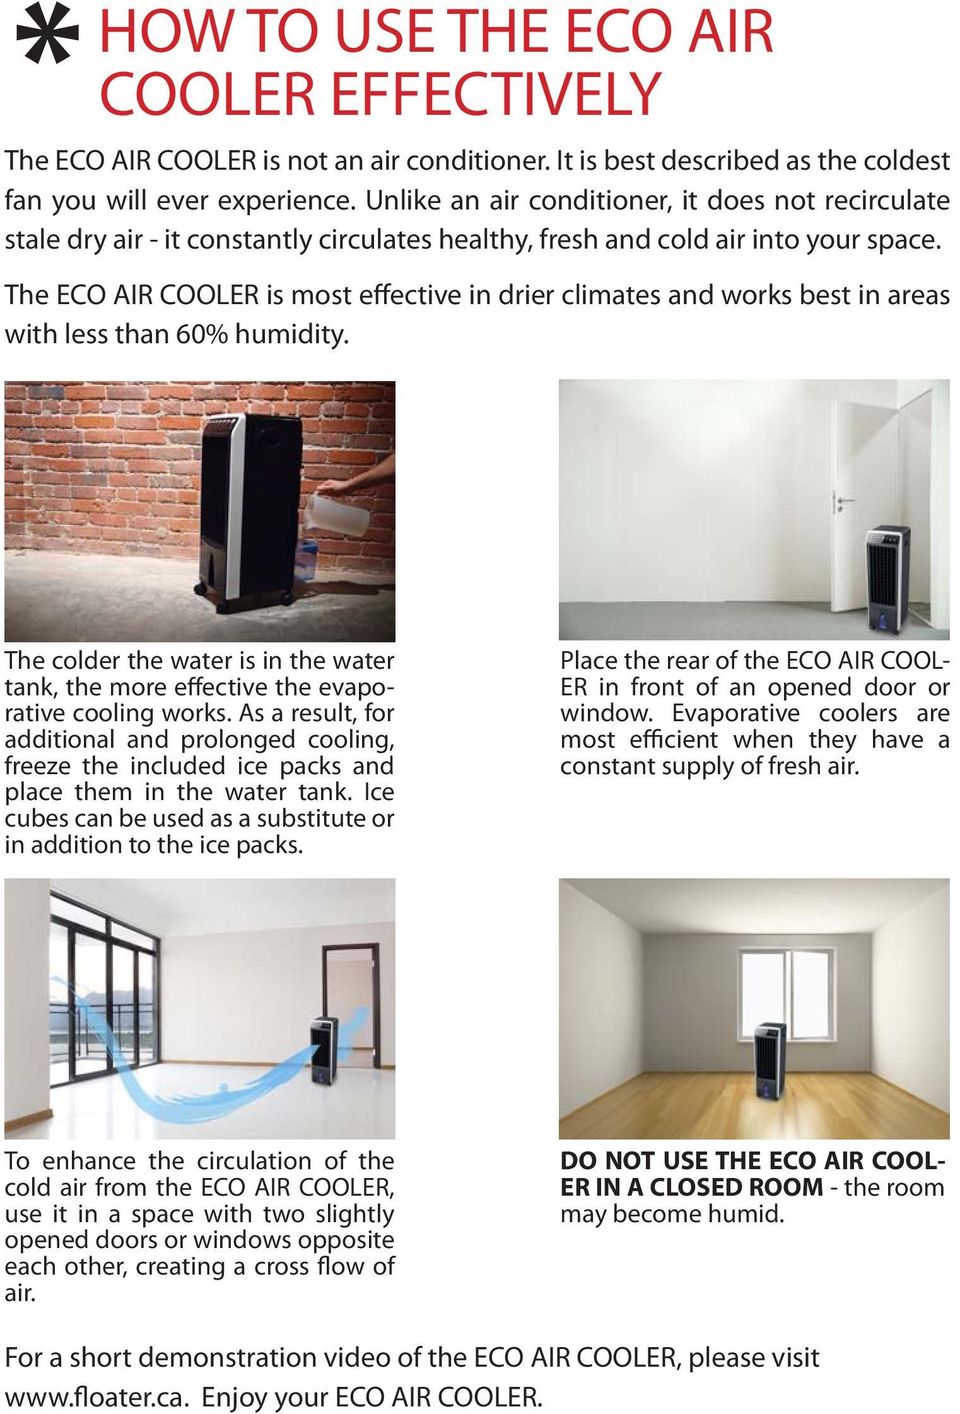 The ECO AIR COOLER is most effective in drier climates and works best in areas with less than 60% humidity. The colder the water is in the water tank, the more effective the evaporative cooling works.